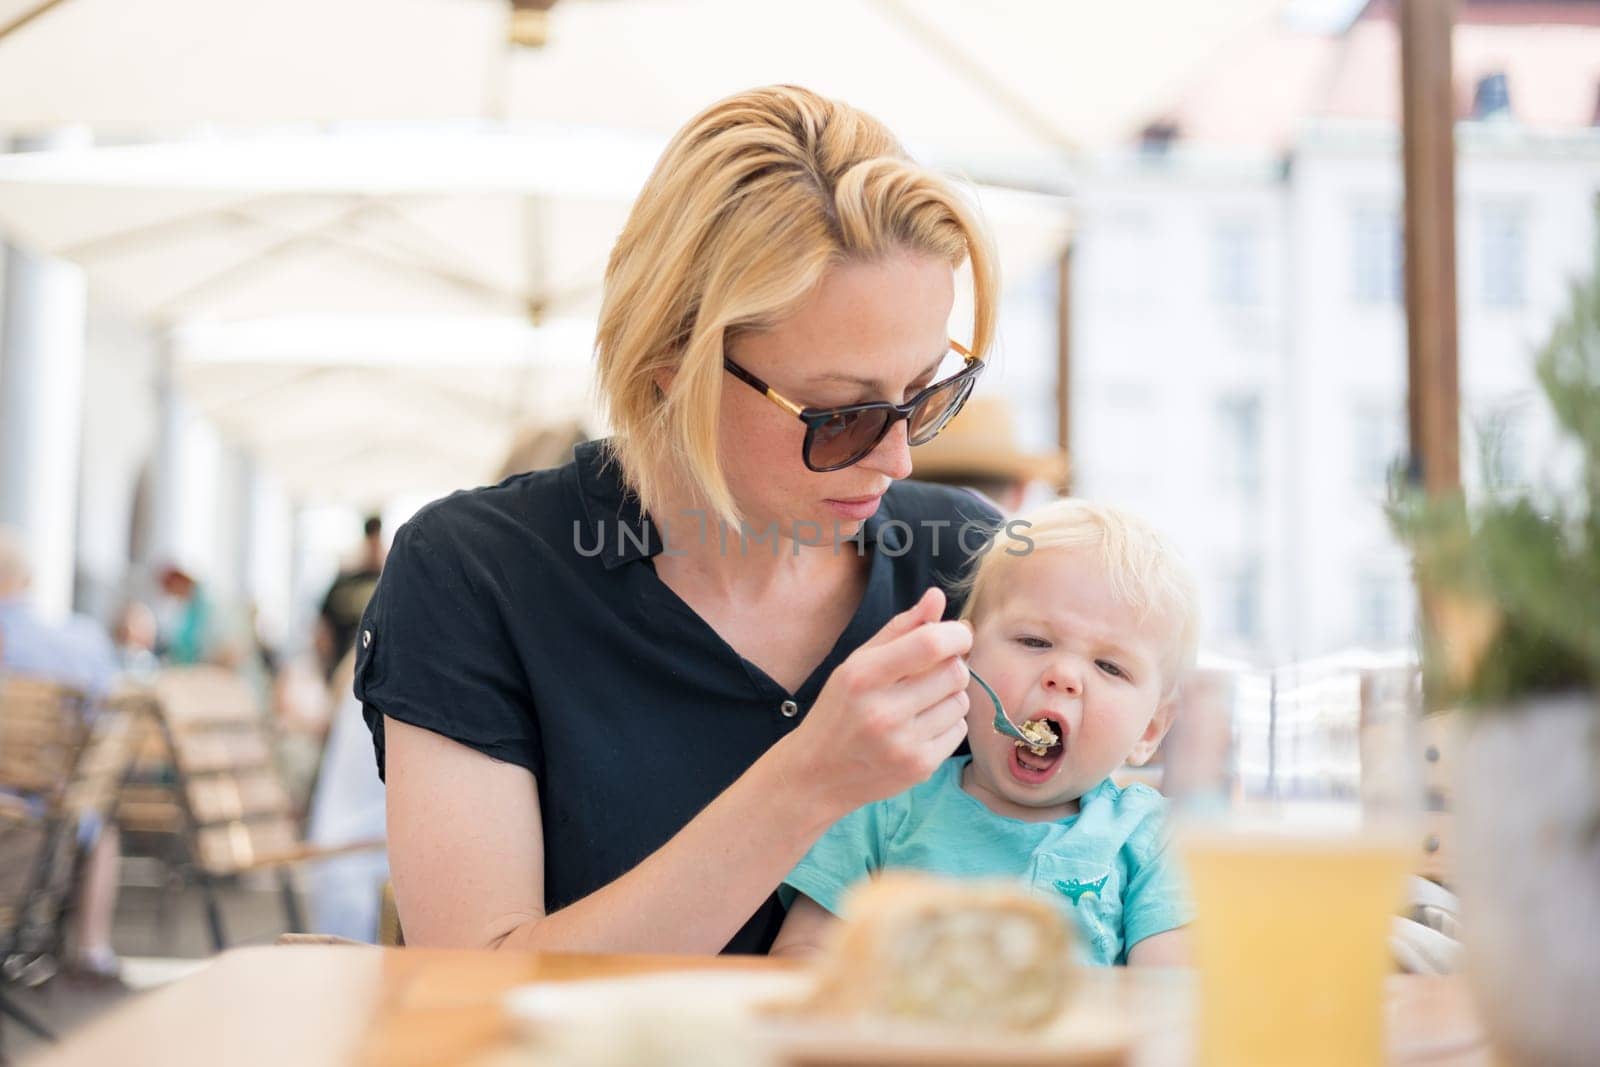 Young caucasian blonde mother spoon feeding her little infant baby boy child outdoors on restaurant or cafe terrace in summer.